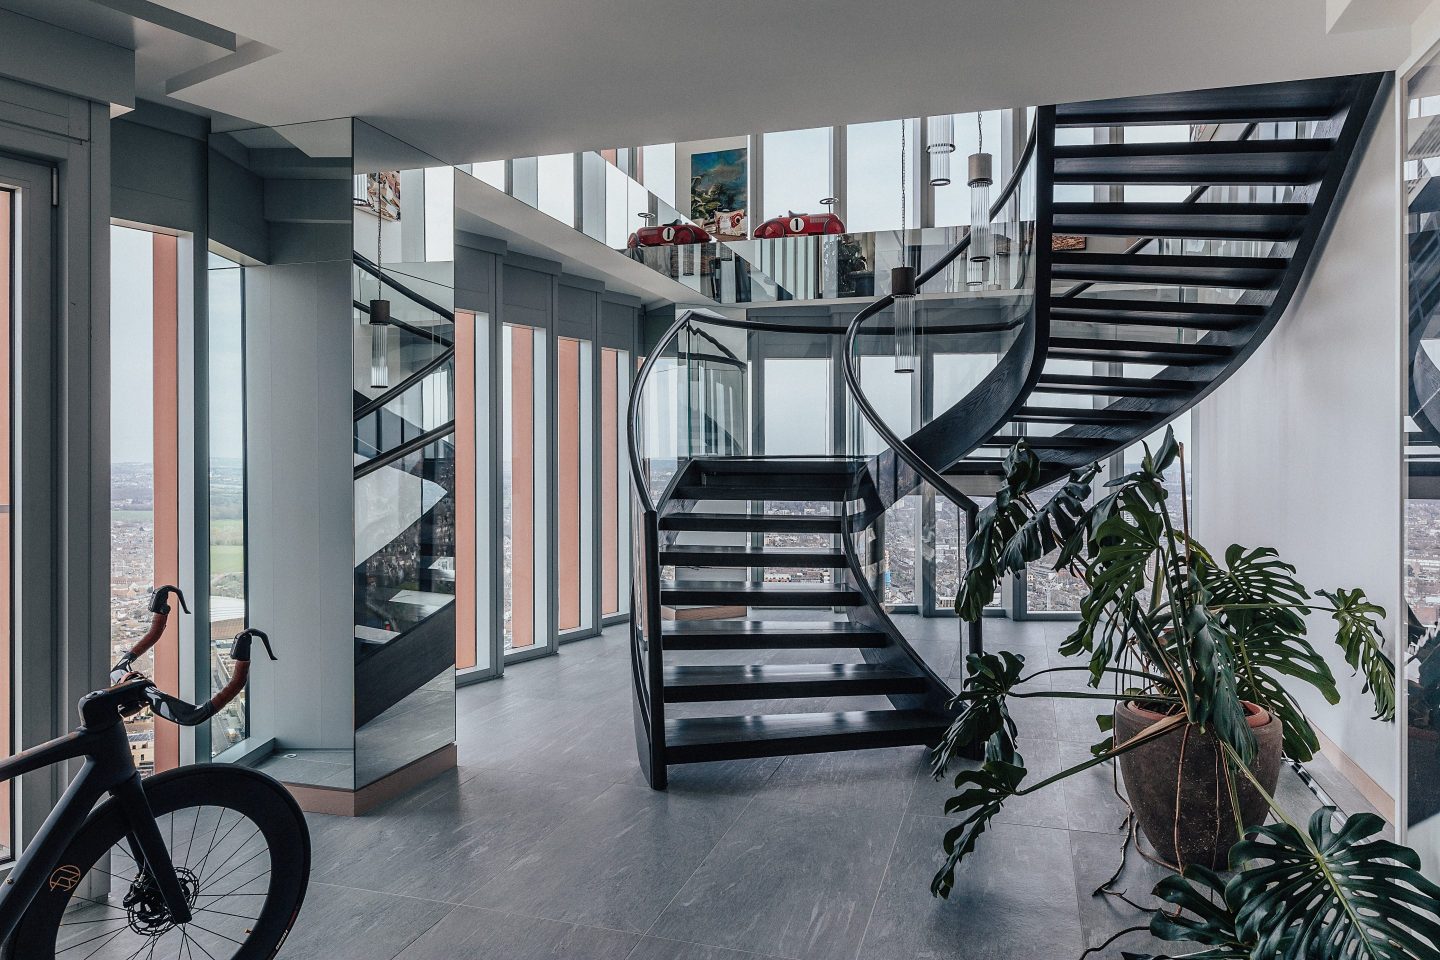 The entrance features a winding iron staircase that leads up to the open-plan primary living space. US-based architect Alex Gorlin undertook the interior design. 